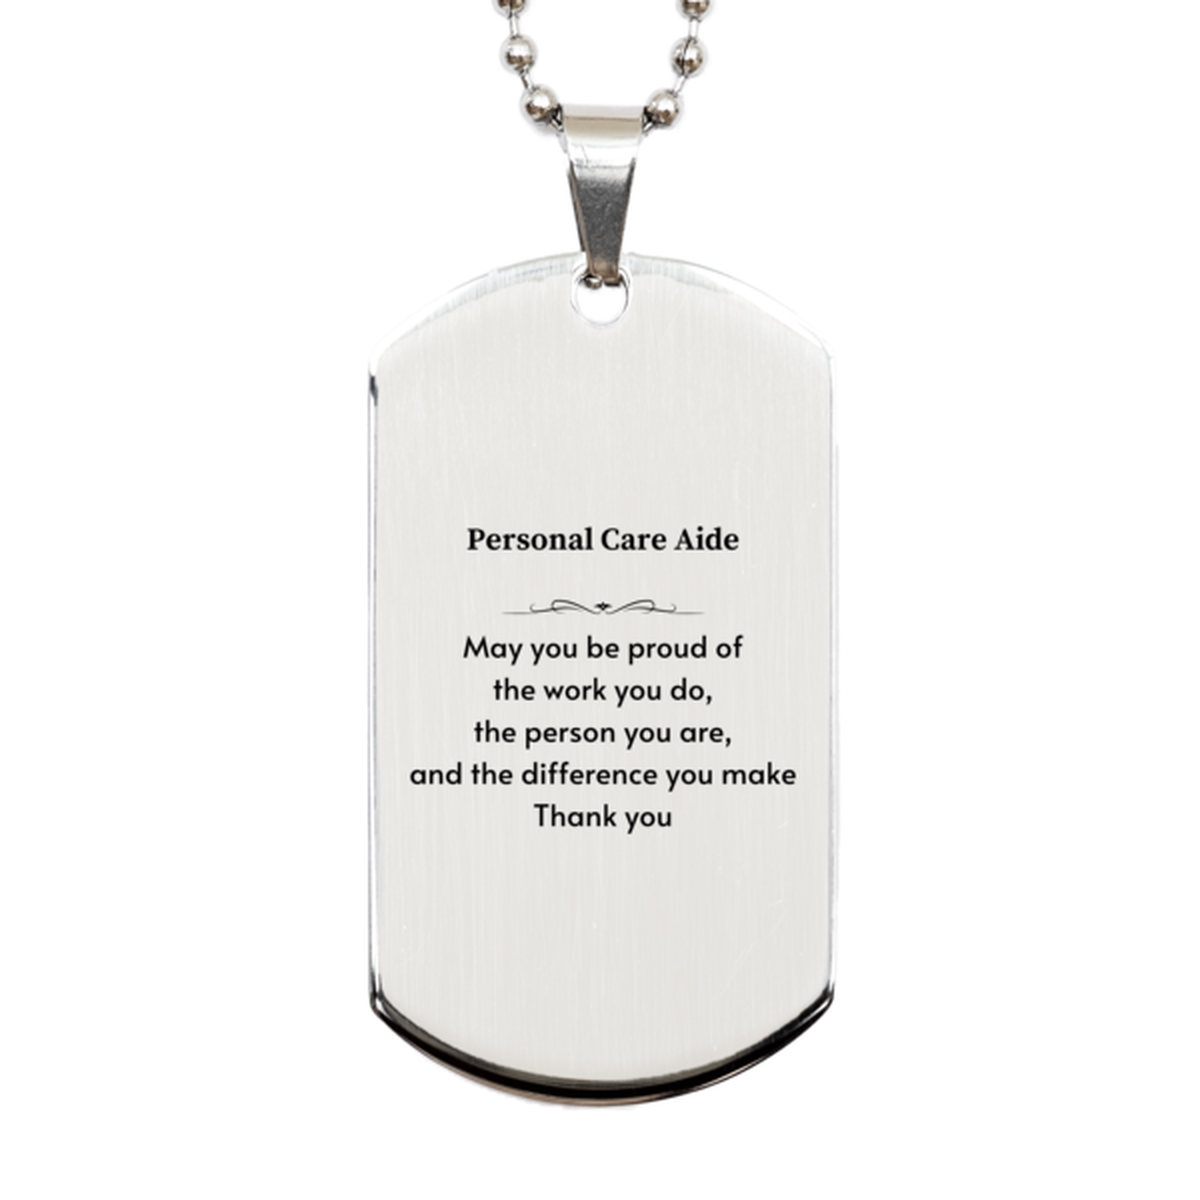 Heartwarming Silver Dog Tag Retirement Coworkers Gifts for Personal Care Aide, Personal Care Aide May You be proud of the work you do, the person you are Gifts for Boss Men Women Friends